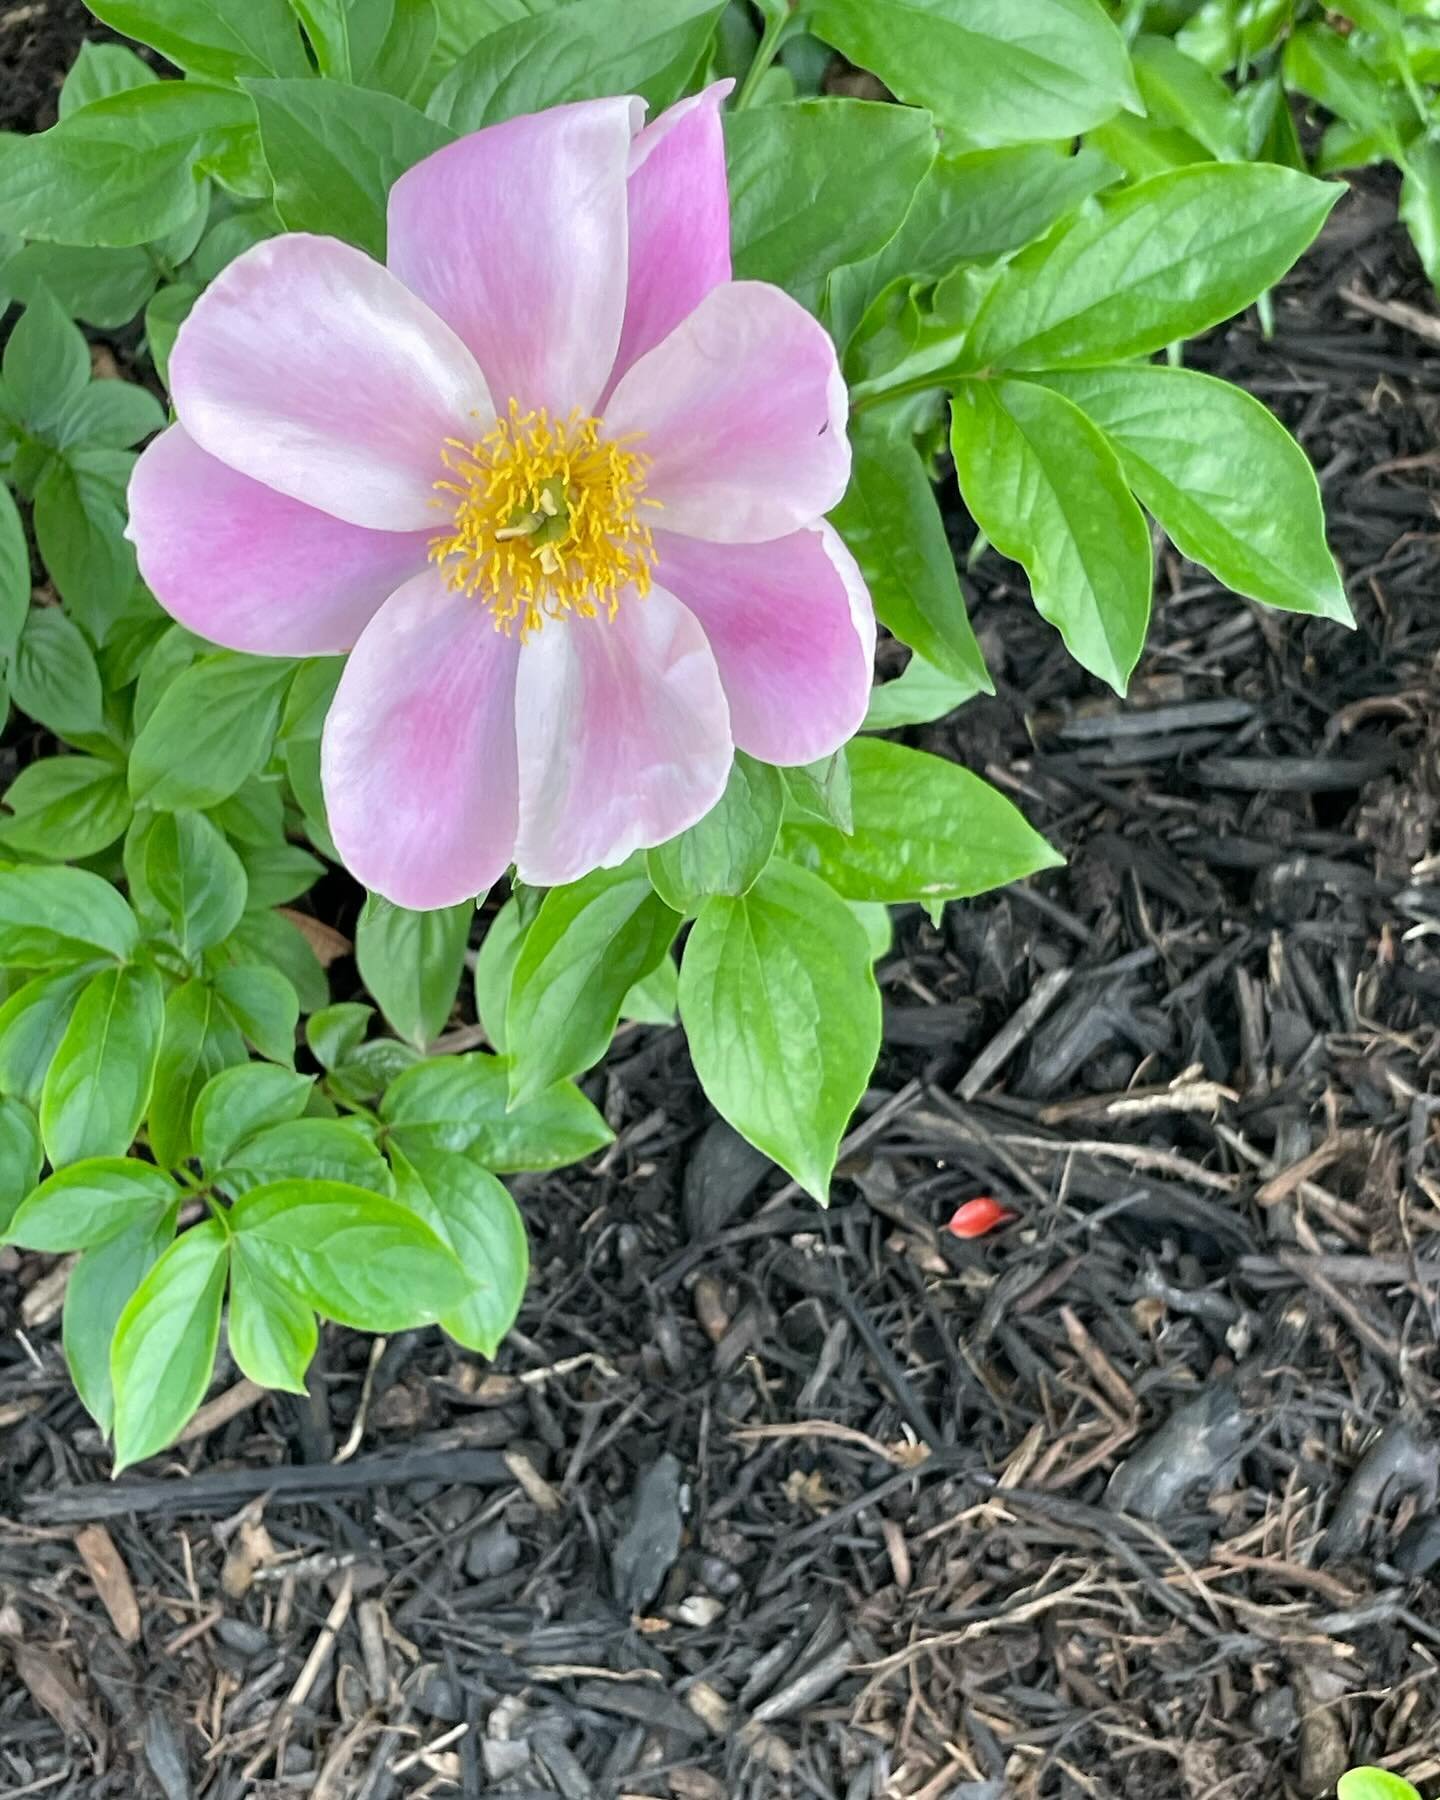 Peonies are blooming. Yay